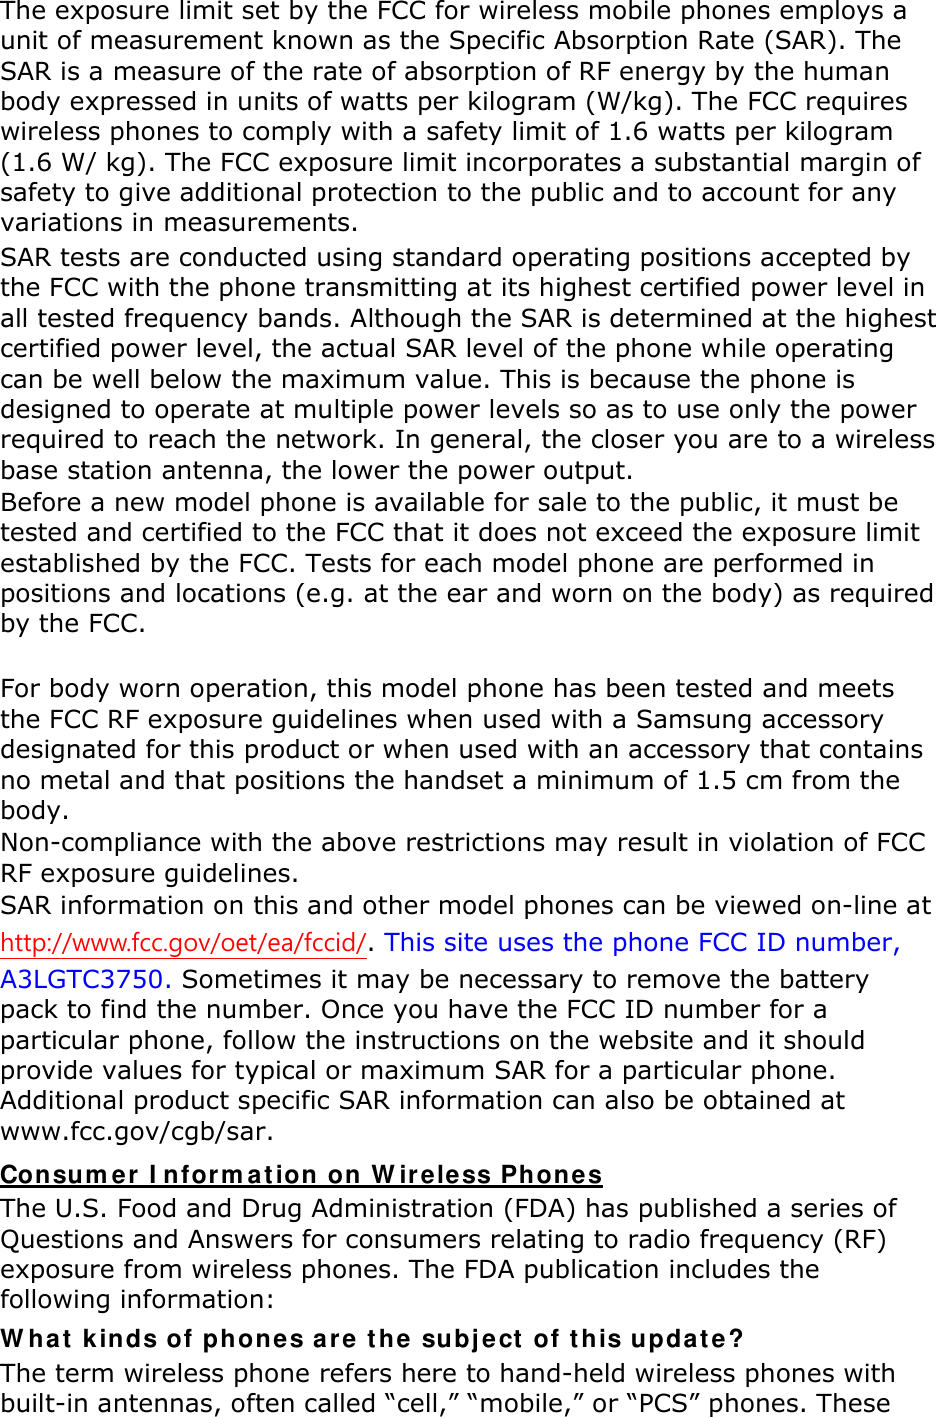 The exposure limit set by the FCC for wireless mobile phones employs a unit of measurement known as the Specific Absorption Rate (SAR). The SAR is a measure of the rate of absorption of RF energy by the human body expressed in units of watts per kilogram (W/kg). The FCC requires wireless phones to comply with a safety limit of 1.6 watts per kilogram (1.6 W/ kg). The FCC exposure limit incorporates a substantial margin of safety to give additional protection to the public and to account for any variations in measurements. SAR tests are conducted using standard operating positions accepted by the FCC with the phone transmitting at its highest certified power level in all tested frequency bands. Although the SAR is determined at the highest certified power level, the actual SAR level of the phone while operating can be well below the maximum value. This is because the phone is designed to operate at multiple power levels so as to use only the power required to reach the network. In general, the closer you are to a wireless base station antenna, the lower the power output. Before a new model phone is available for sale to the public, it must be tested and certified to the FCC that it does not exceed the exposure limit established by the FCC. Tests for each model phone are performed in positions and locations (e.g. at the ear and worn on the body) as required by the FCC.      For body worn operation, this model phone has been tested and meets the FCC RF exposure guidelines when used with a Samsung accessory designated for this product or when used with an accessory that contains no metal and that positions the handset a minimum of 1.5 cm from the body.   Non-compliance with the above restrictions may result in violation of FCC RF exposure guidelines. SAR information on this and other model phones can be viewed on-line at http://www.fcc.gov/oet/ea/fccid/. This site uses the phone FCC ID number, A3LGTC3750. Sometimes it may be necessary to remove the battery pack to find the number. Once you have the FCC ID number for a particular phone, follow the instructions on the website and it should provide values for typical or maximum SAR for a particular phone. Additional product specific SAR information can also be obtained at www.fcc.gov/cgb/sar. Consumer Information on Wireless Phones The U.S. Food and Drug Administration (FDA) has published a series of Questions and Answers for consumers relating to radio frequency (RF) exposure from wireless phones. The FDA publication includes the following information: What kinds of phones are the subject of this update? The term wireless phone refers here to hand-held wireless phones with built-in antennas, often called “cell,” “mobile,” or “PCS” phones. These 